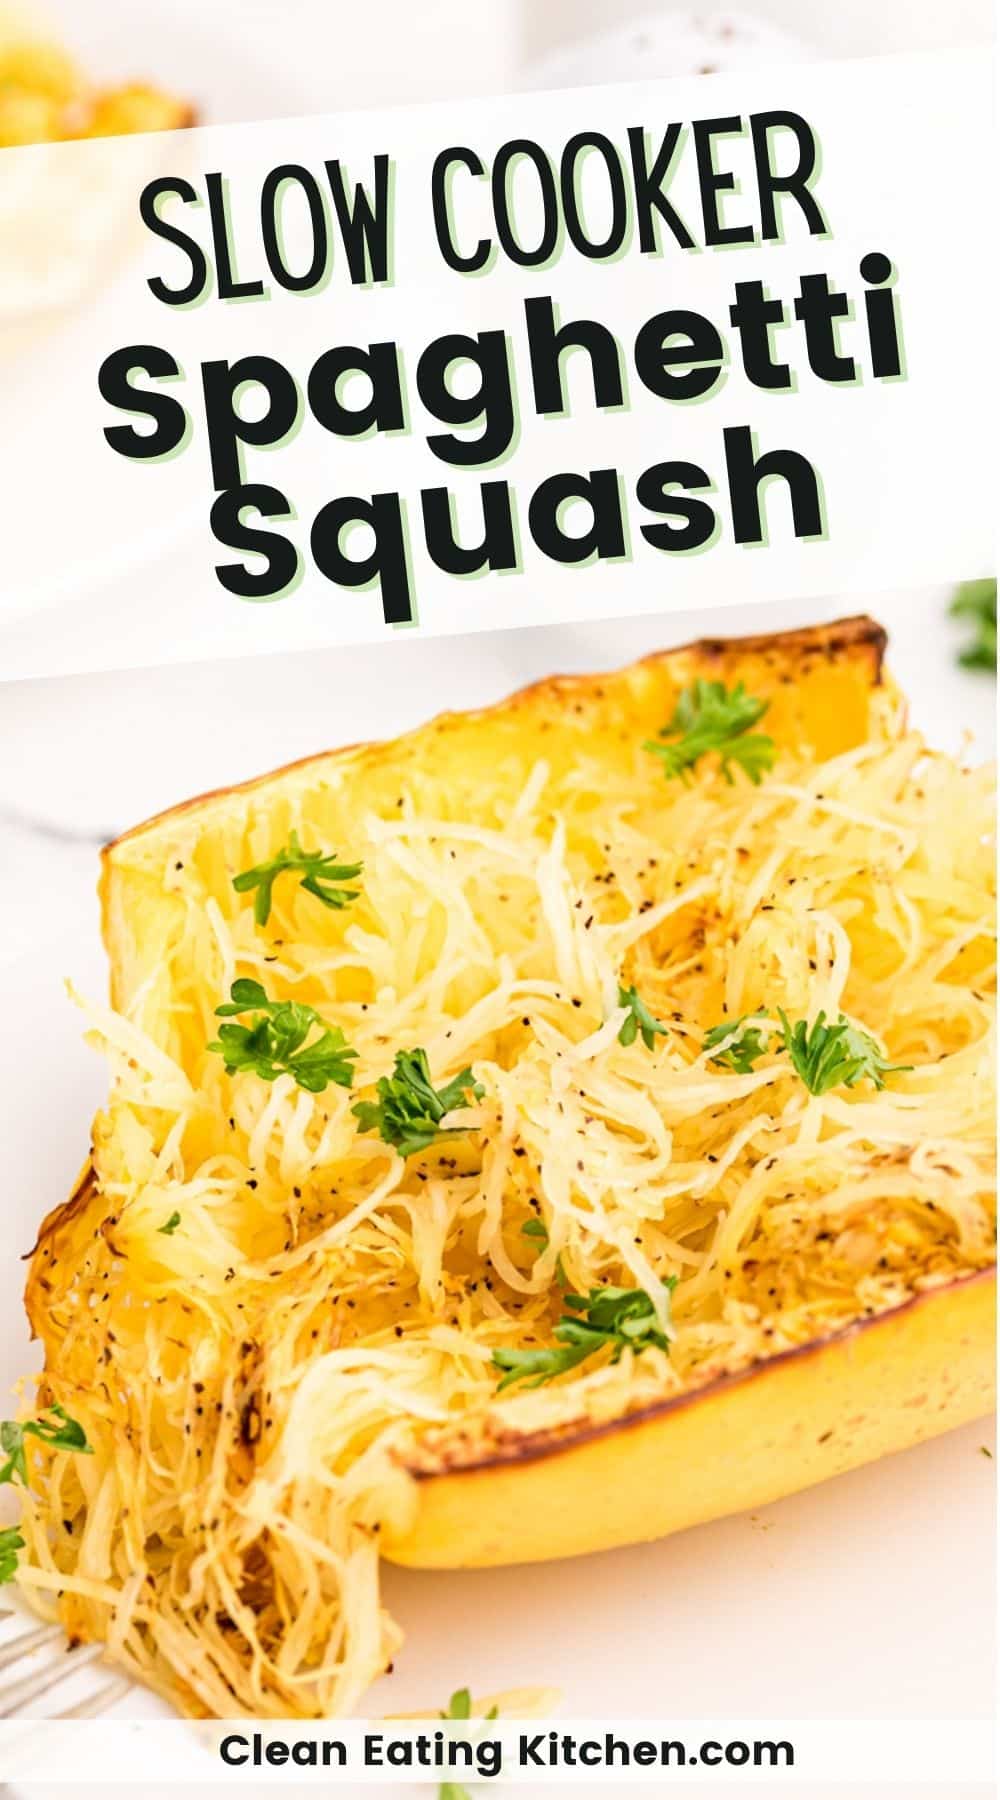 Crockpot Spaghetti Squash | Cooked Whole - Clean Eating Kitchen